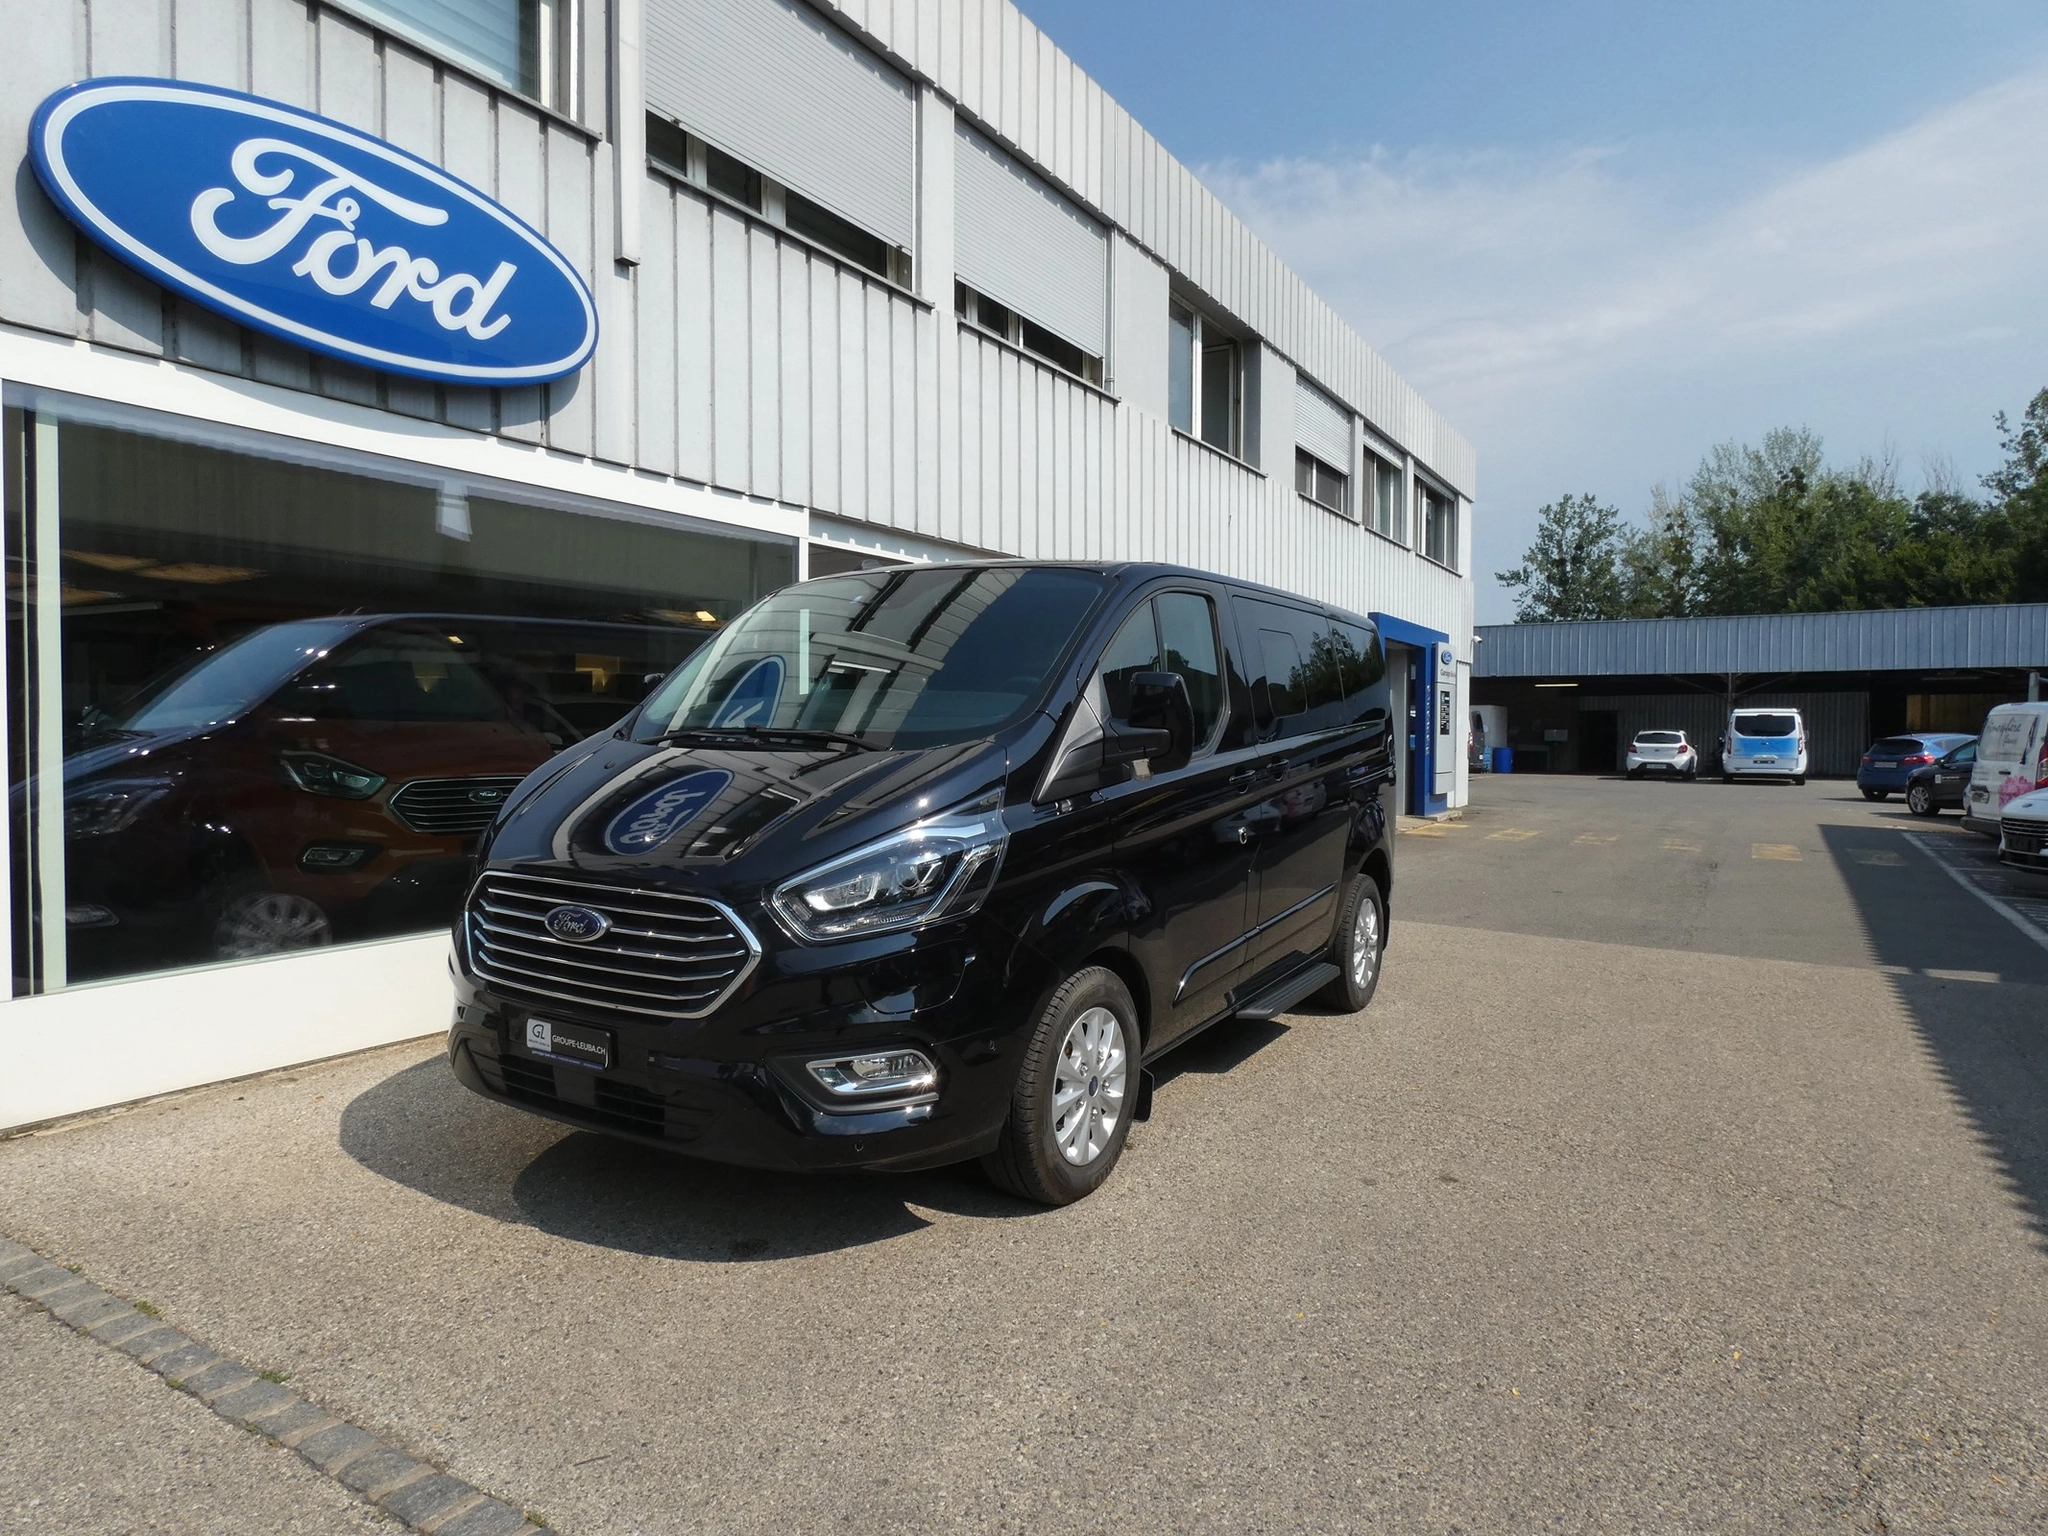 FORD-Tourneo-car-image